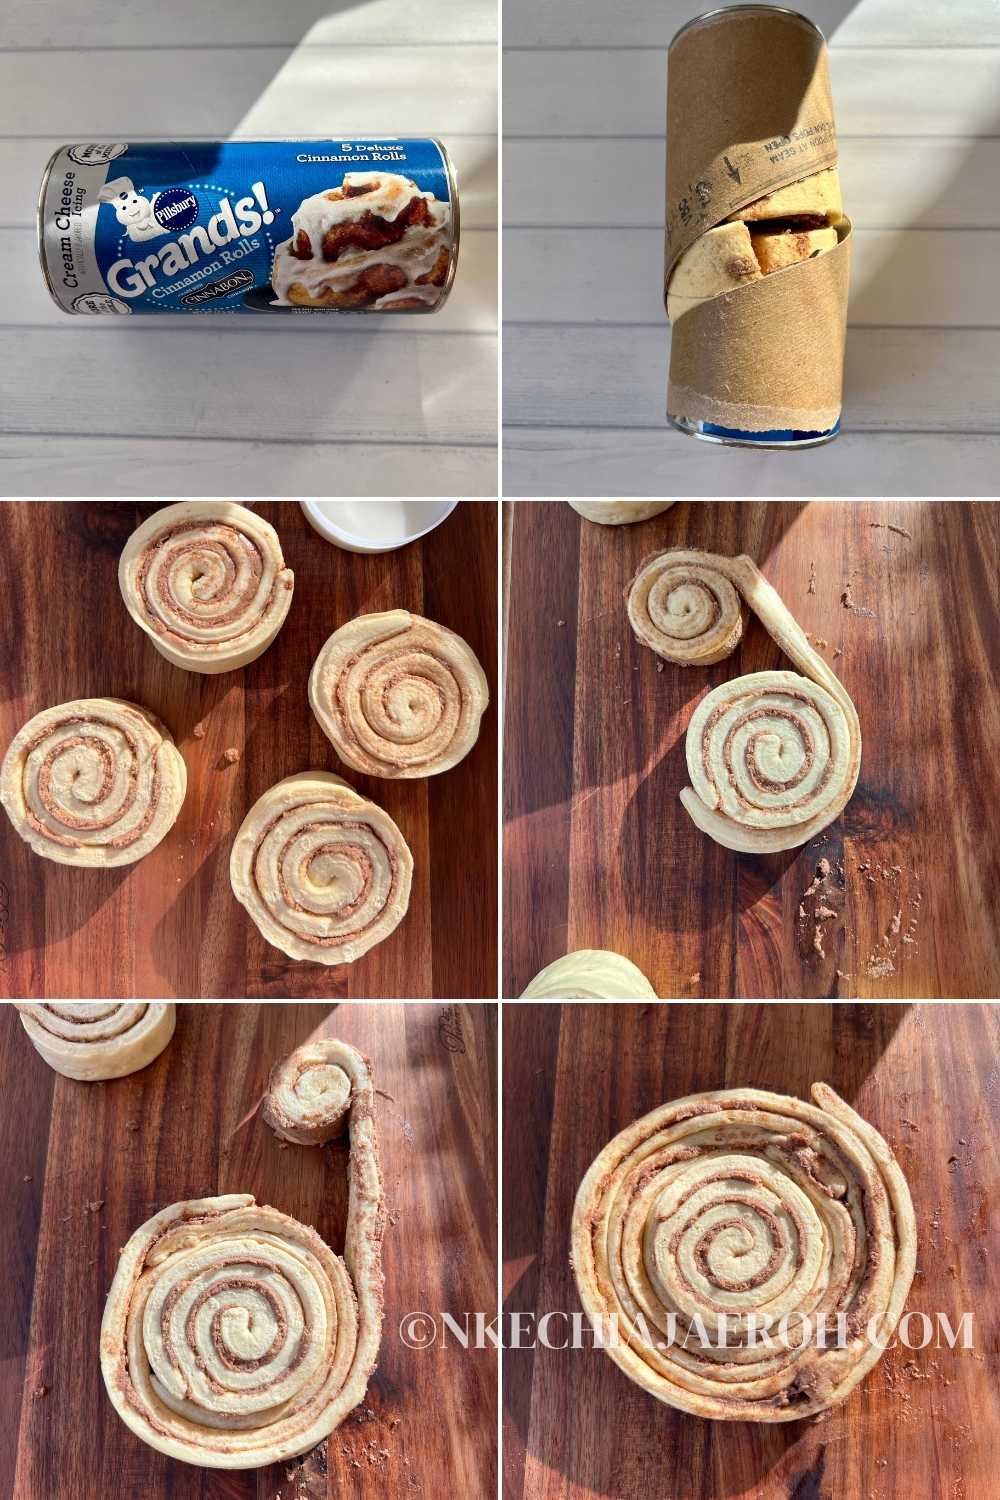 Open and separate the Pillsbury deluxe cinnamon rolls, place one in the center and wrap the three others around it.